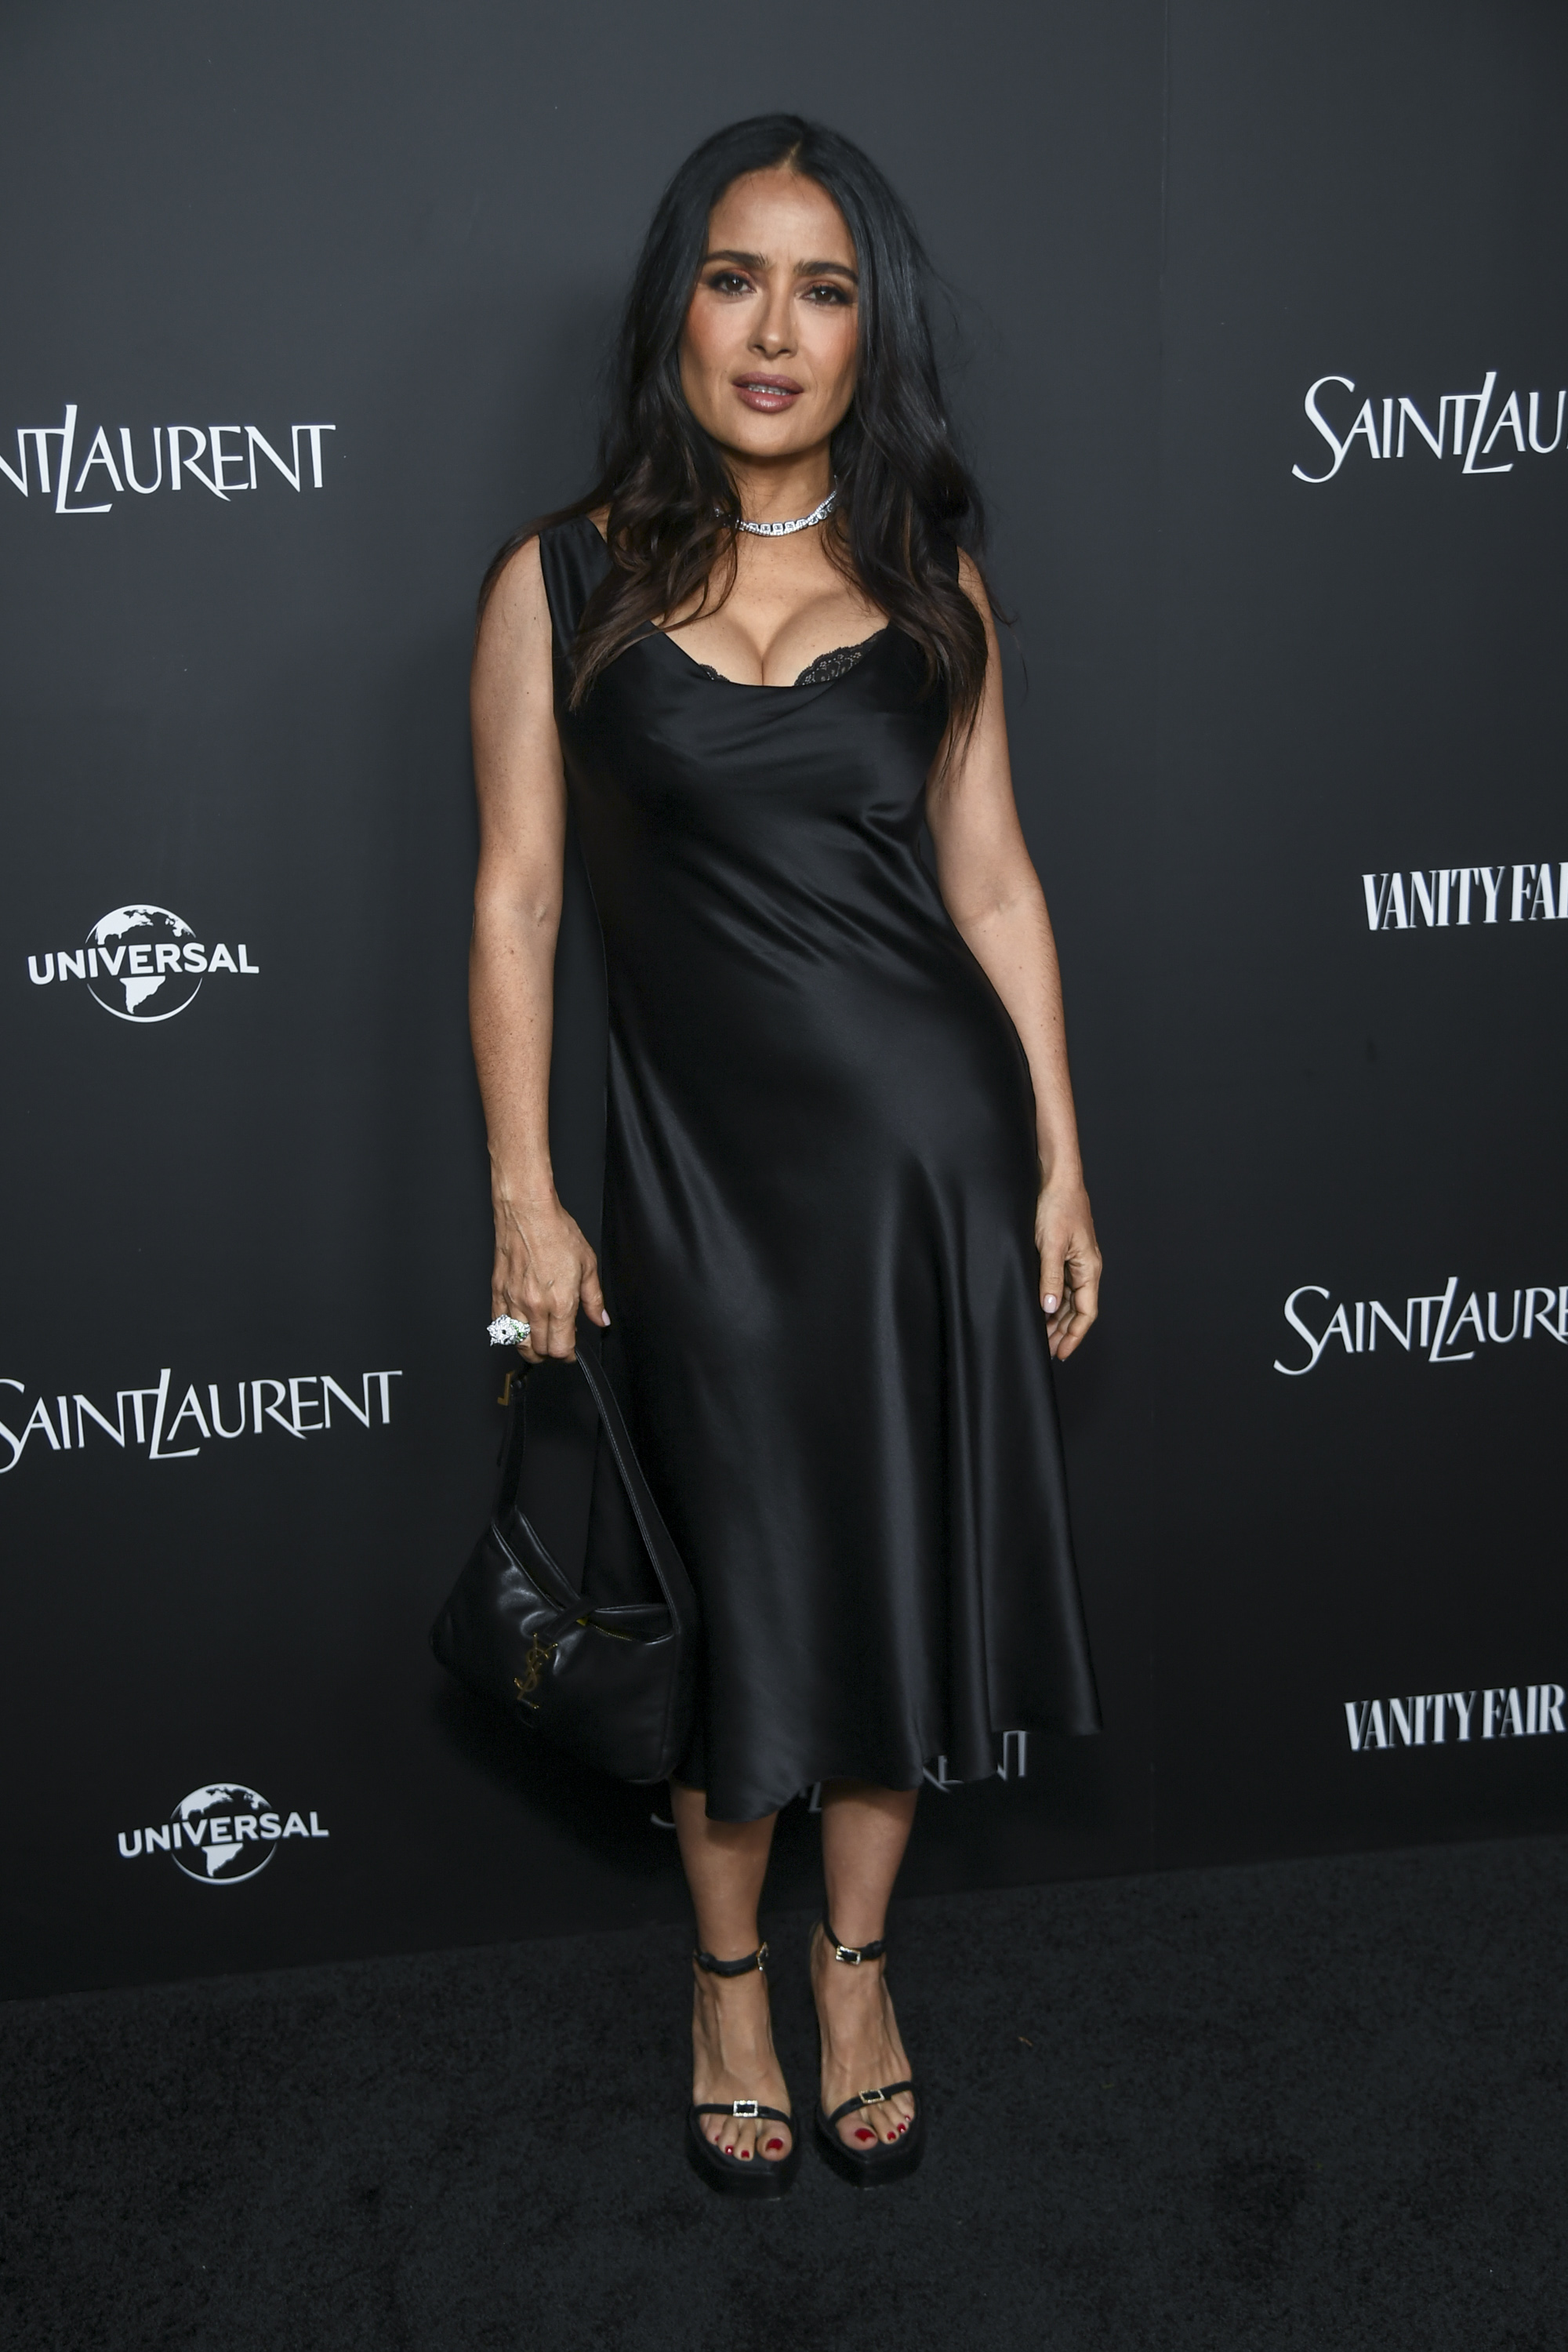 In March, Salma stunned in an all-black dress at an Oscars event